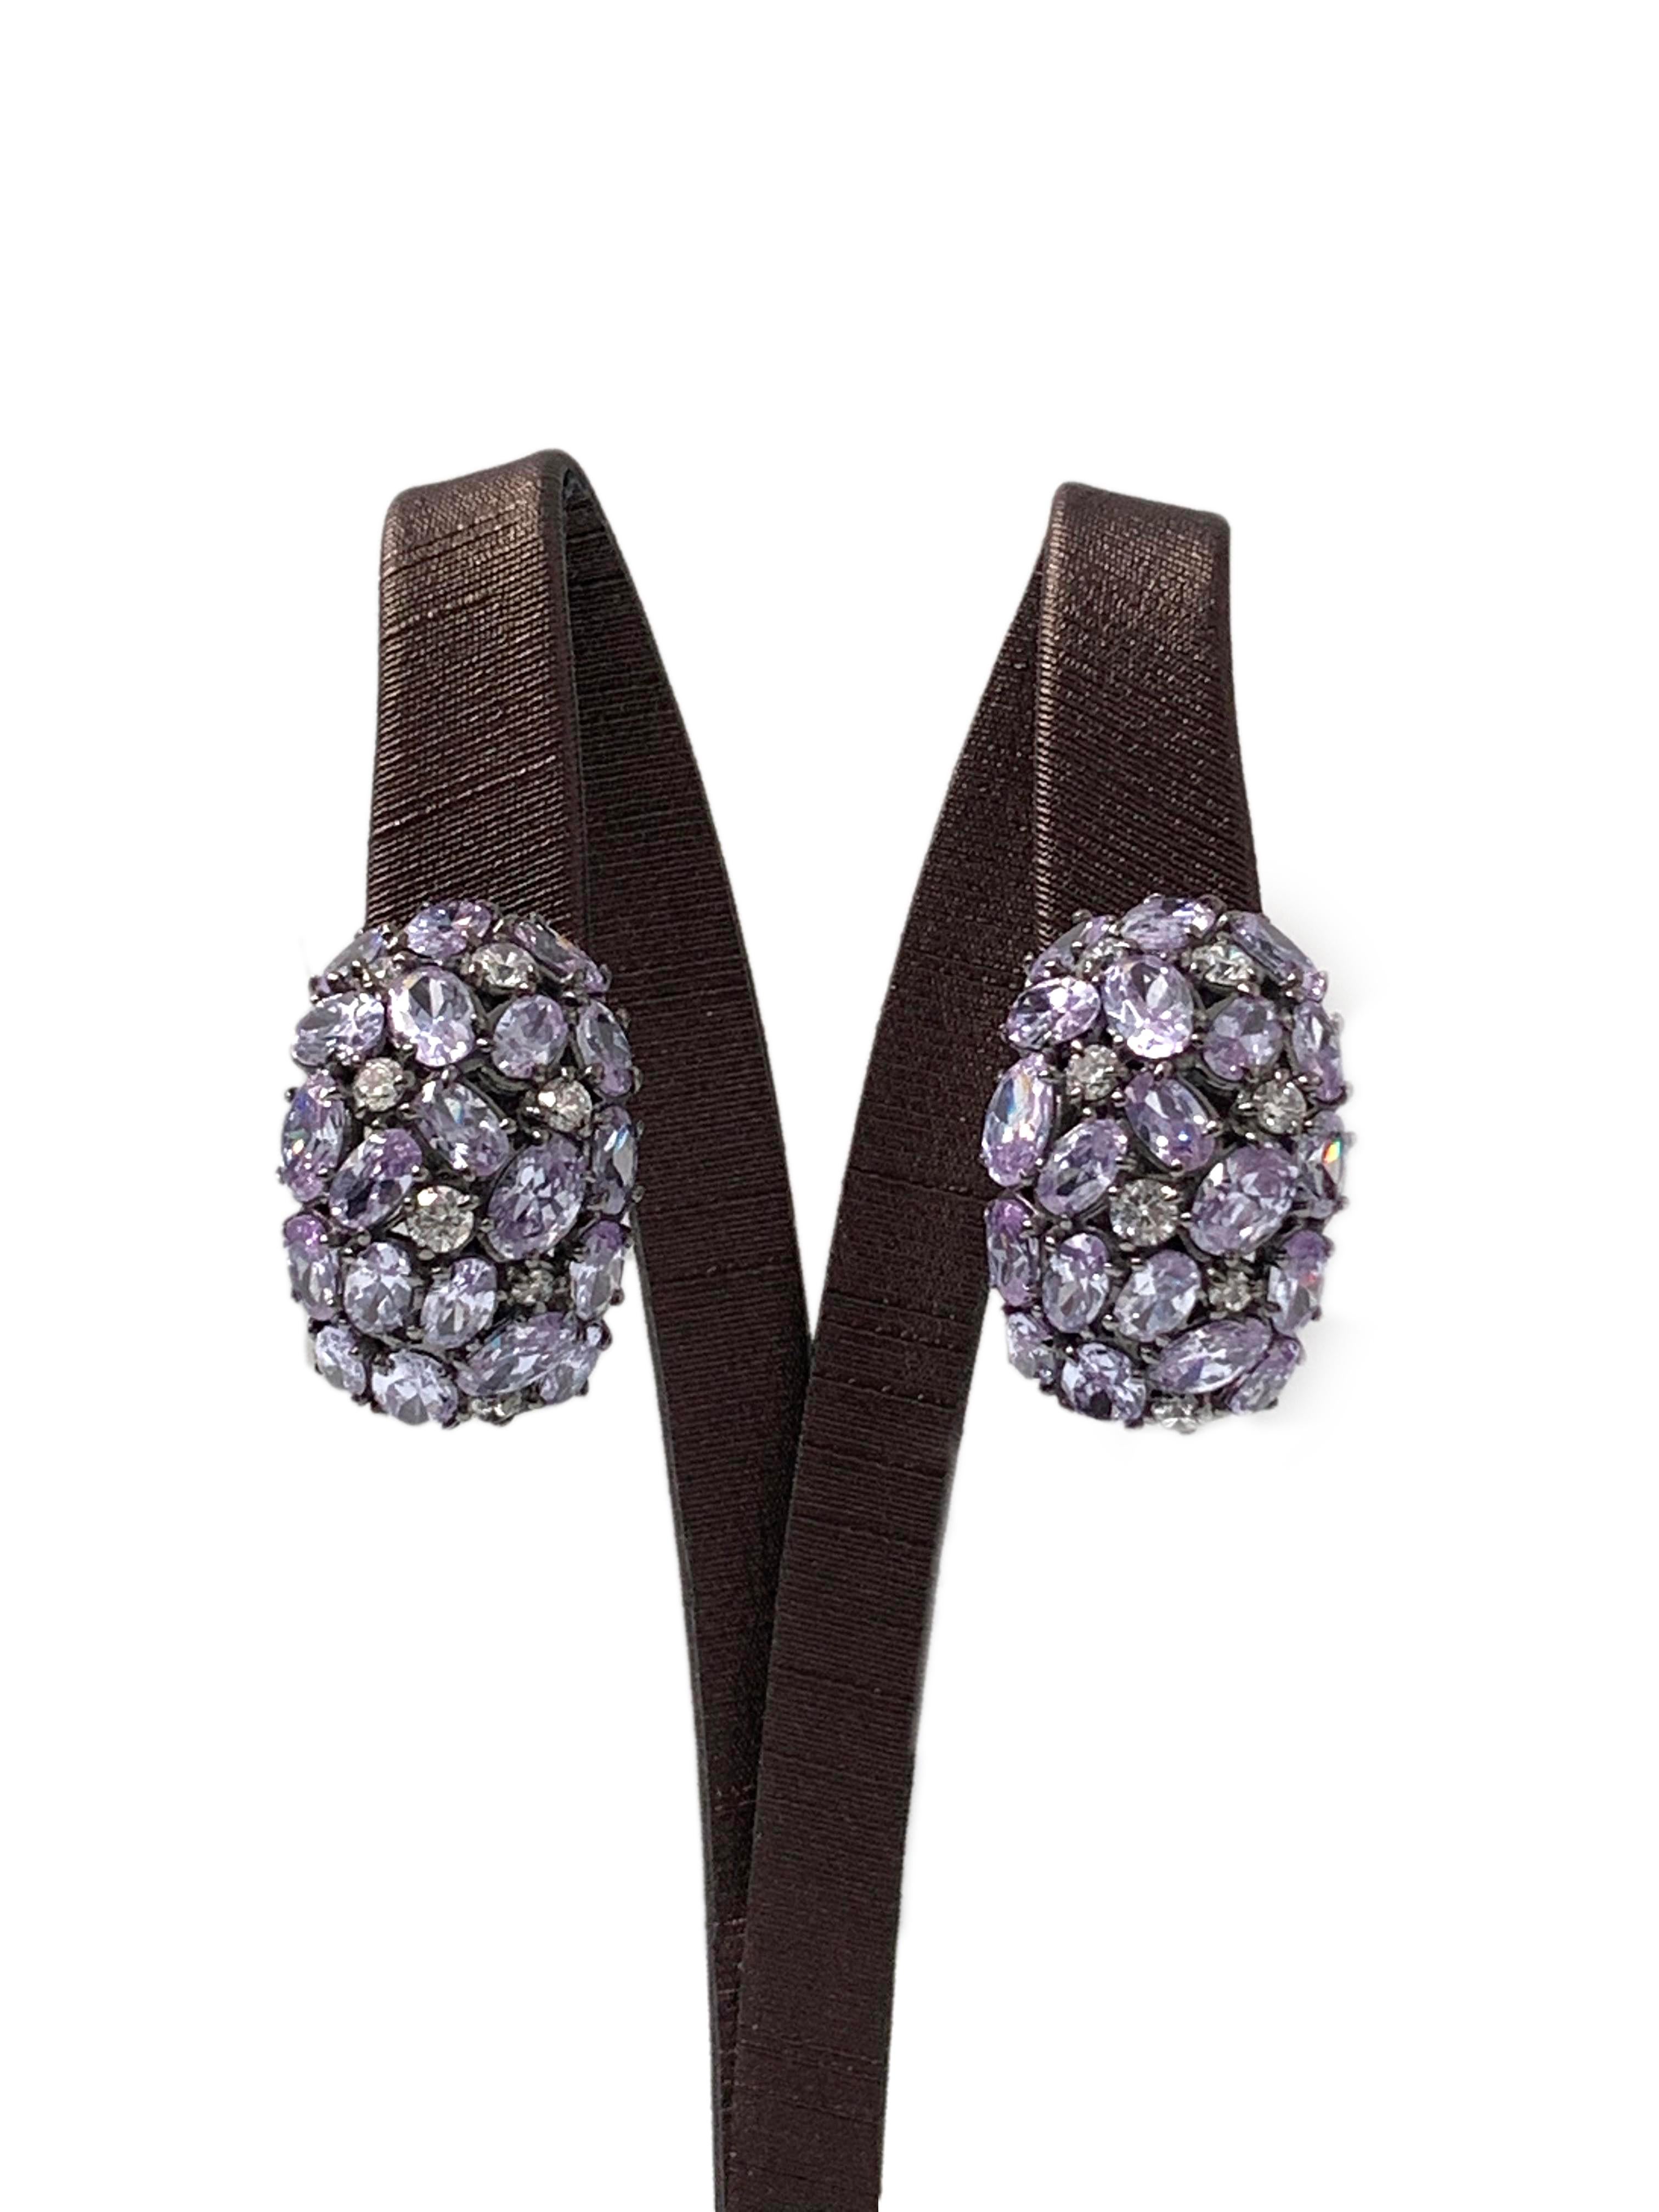 Fabulous encrusted Lavender CZ and Simulated Diamond Clip-on Earrings

These earrings feature 94 pcs of oval lavender cz and round cubic zirconia, handset in black rhodium plated sterling silver. The earrings measure approximately 1